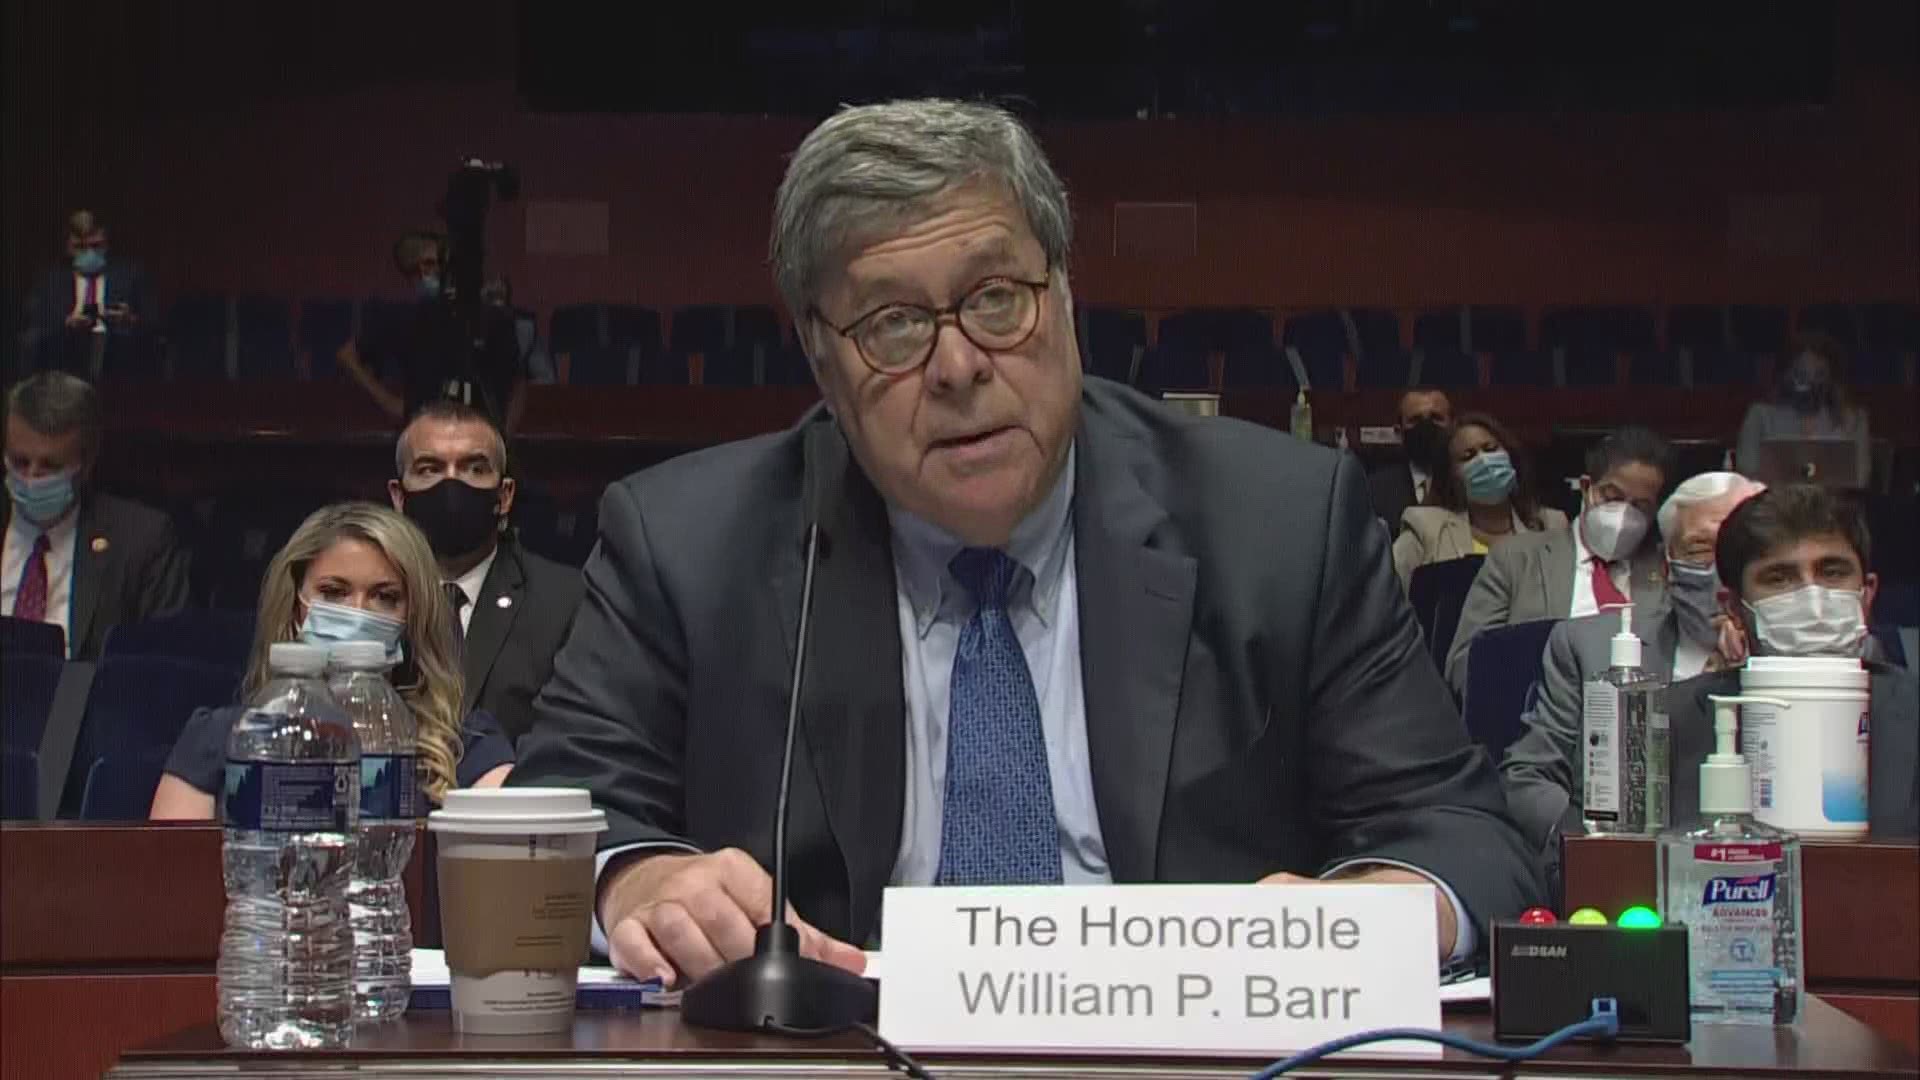 Attorney General William Barr provides opening statement to the House Judiciary Committee.